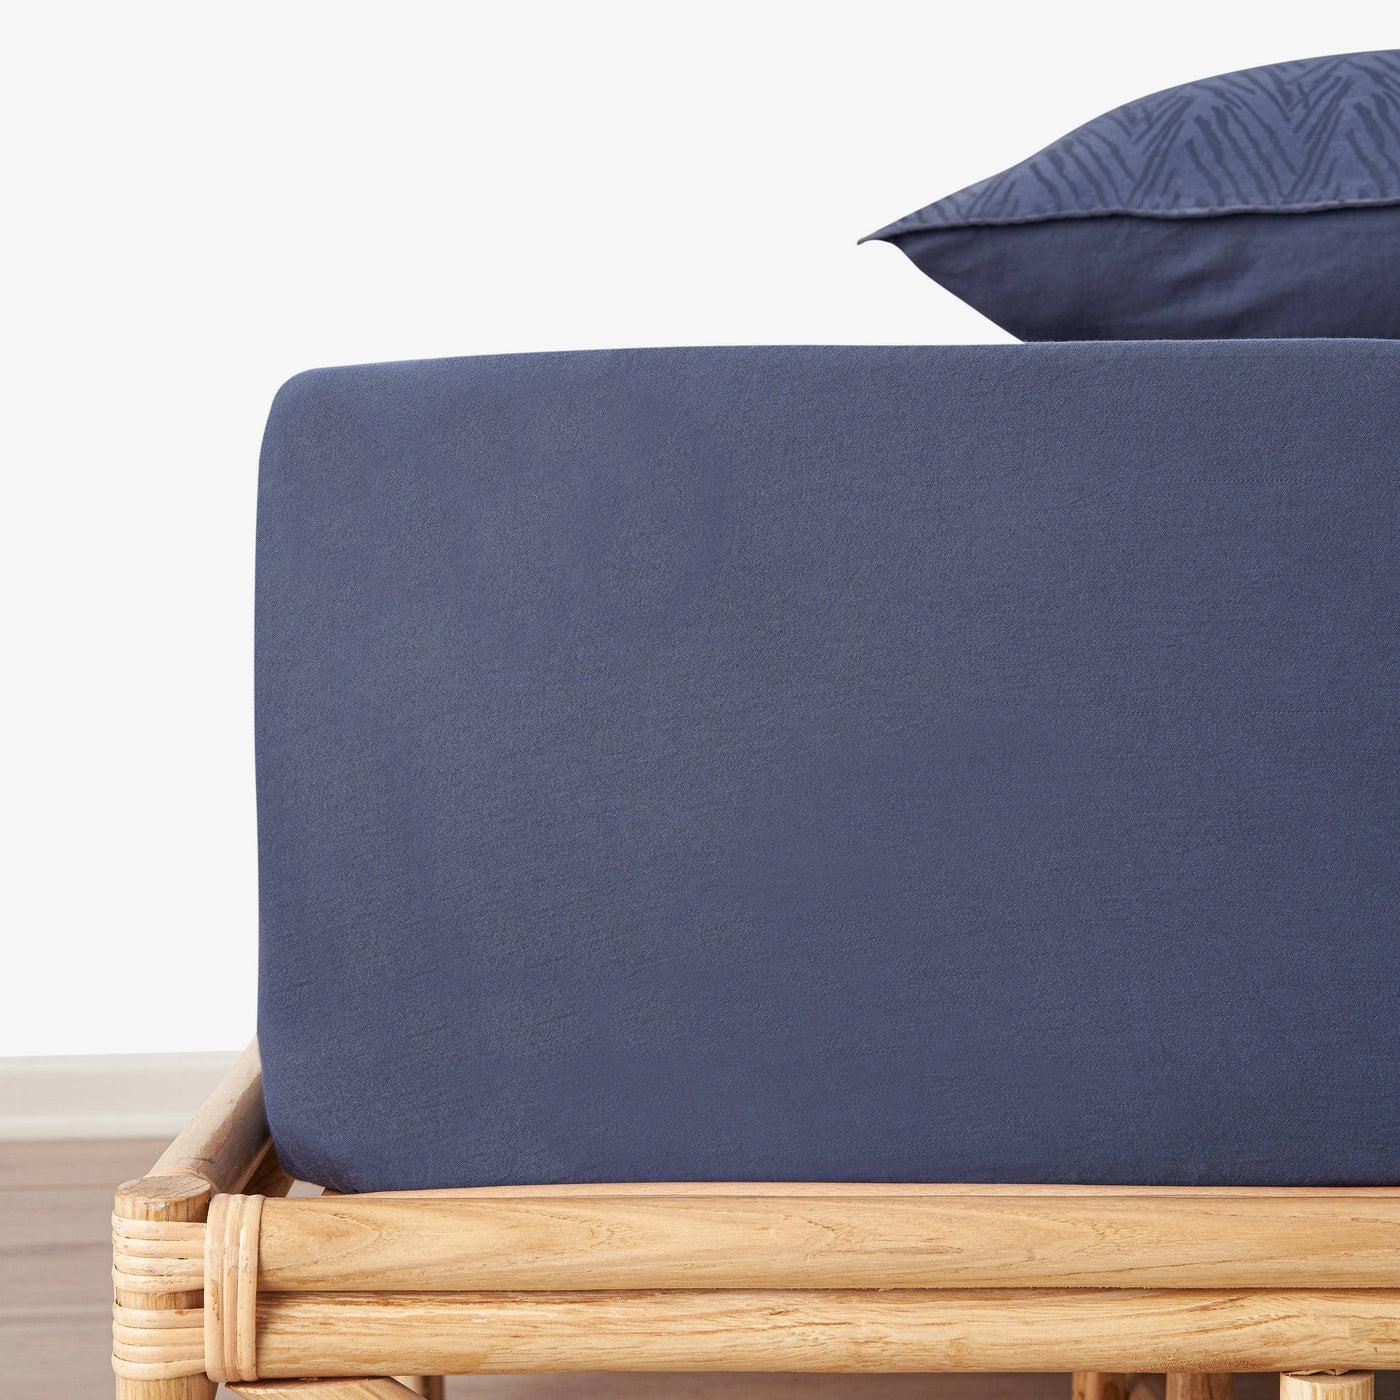 Freddie 100% Turkish Cotton 300 TC Fitted Sheet, Navy, Super King Size Bed Sheets sazy.com